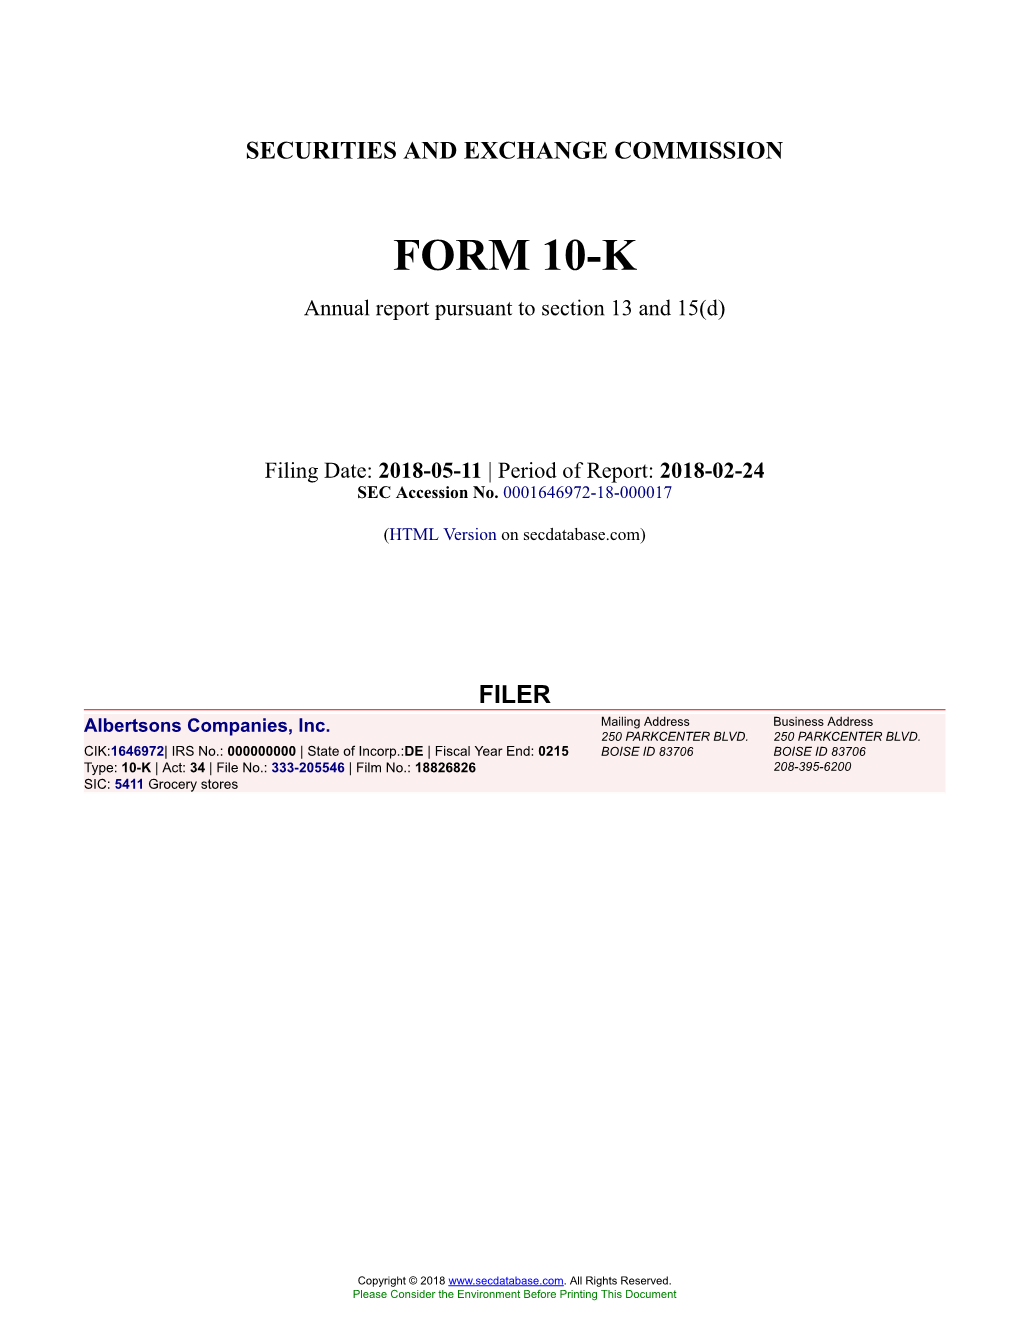 Albertsons Companies, Inc. Form 10-K Annual Report Filed 2018-05-11